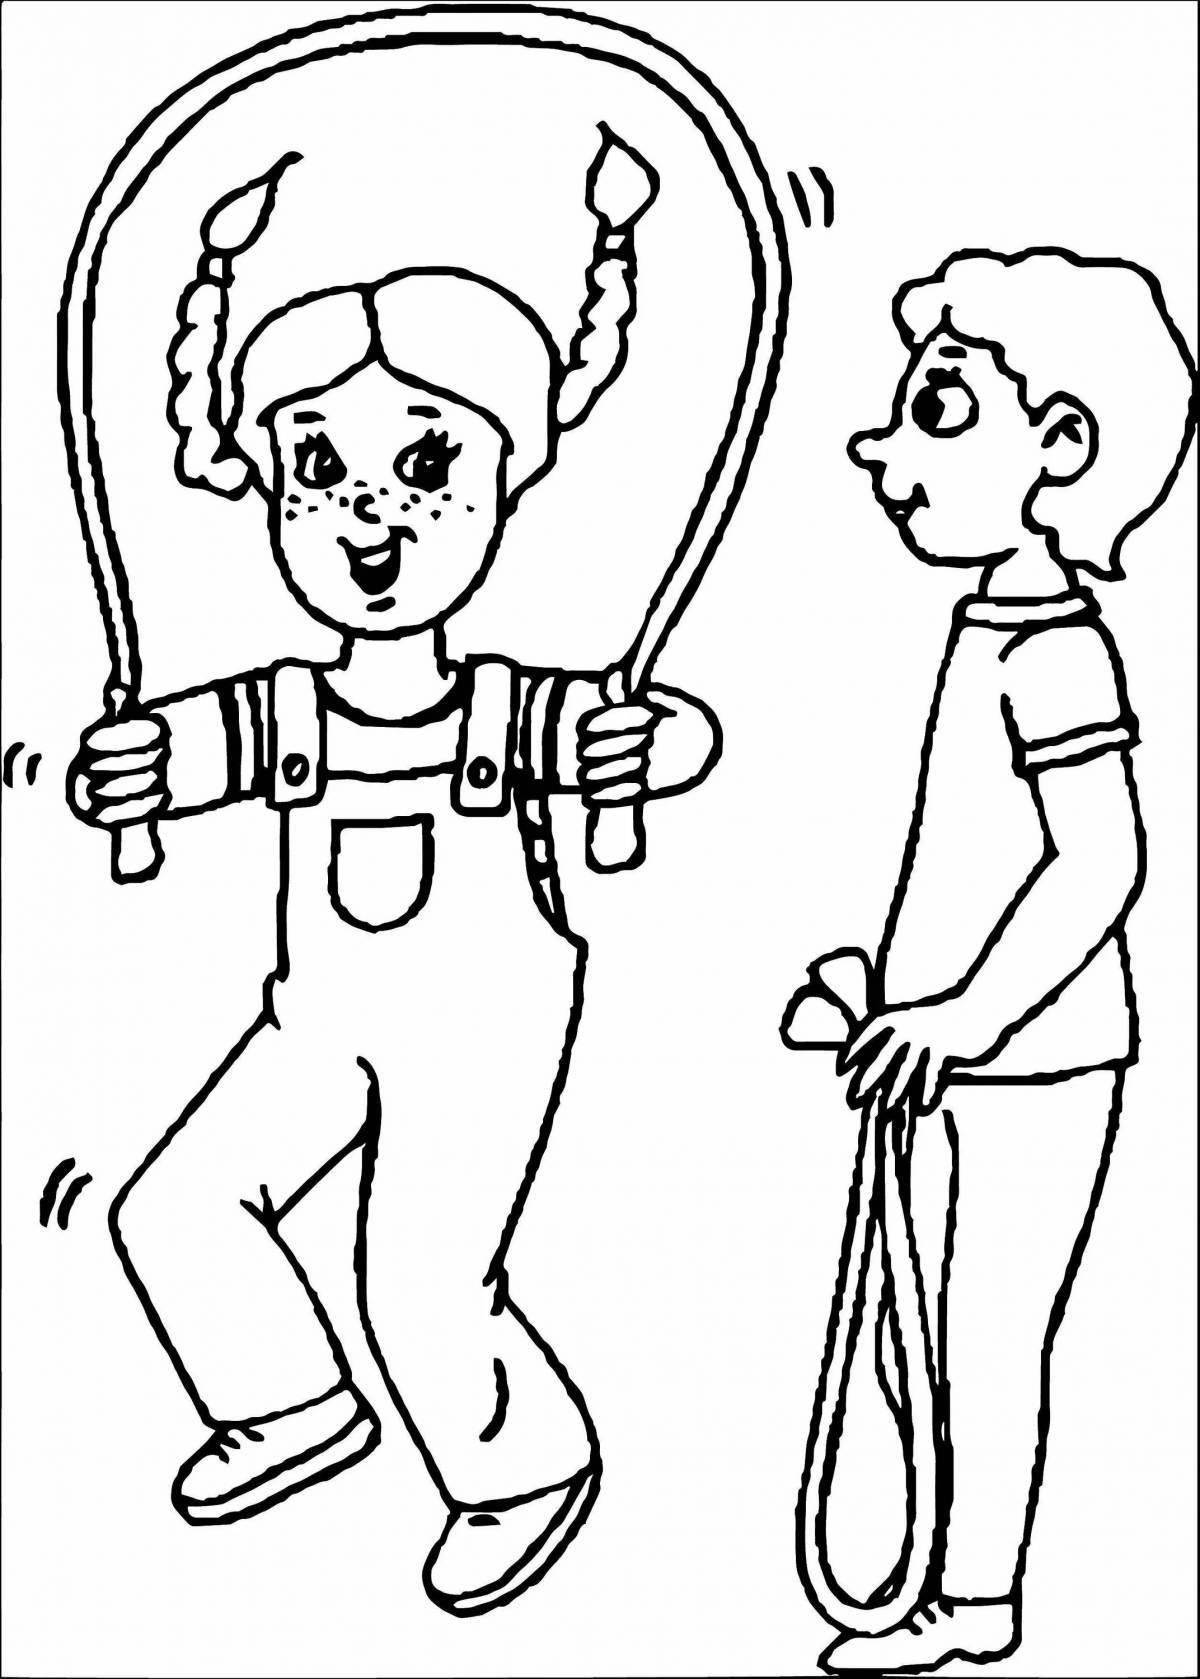 Exciting health coloring page